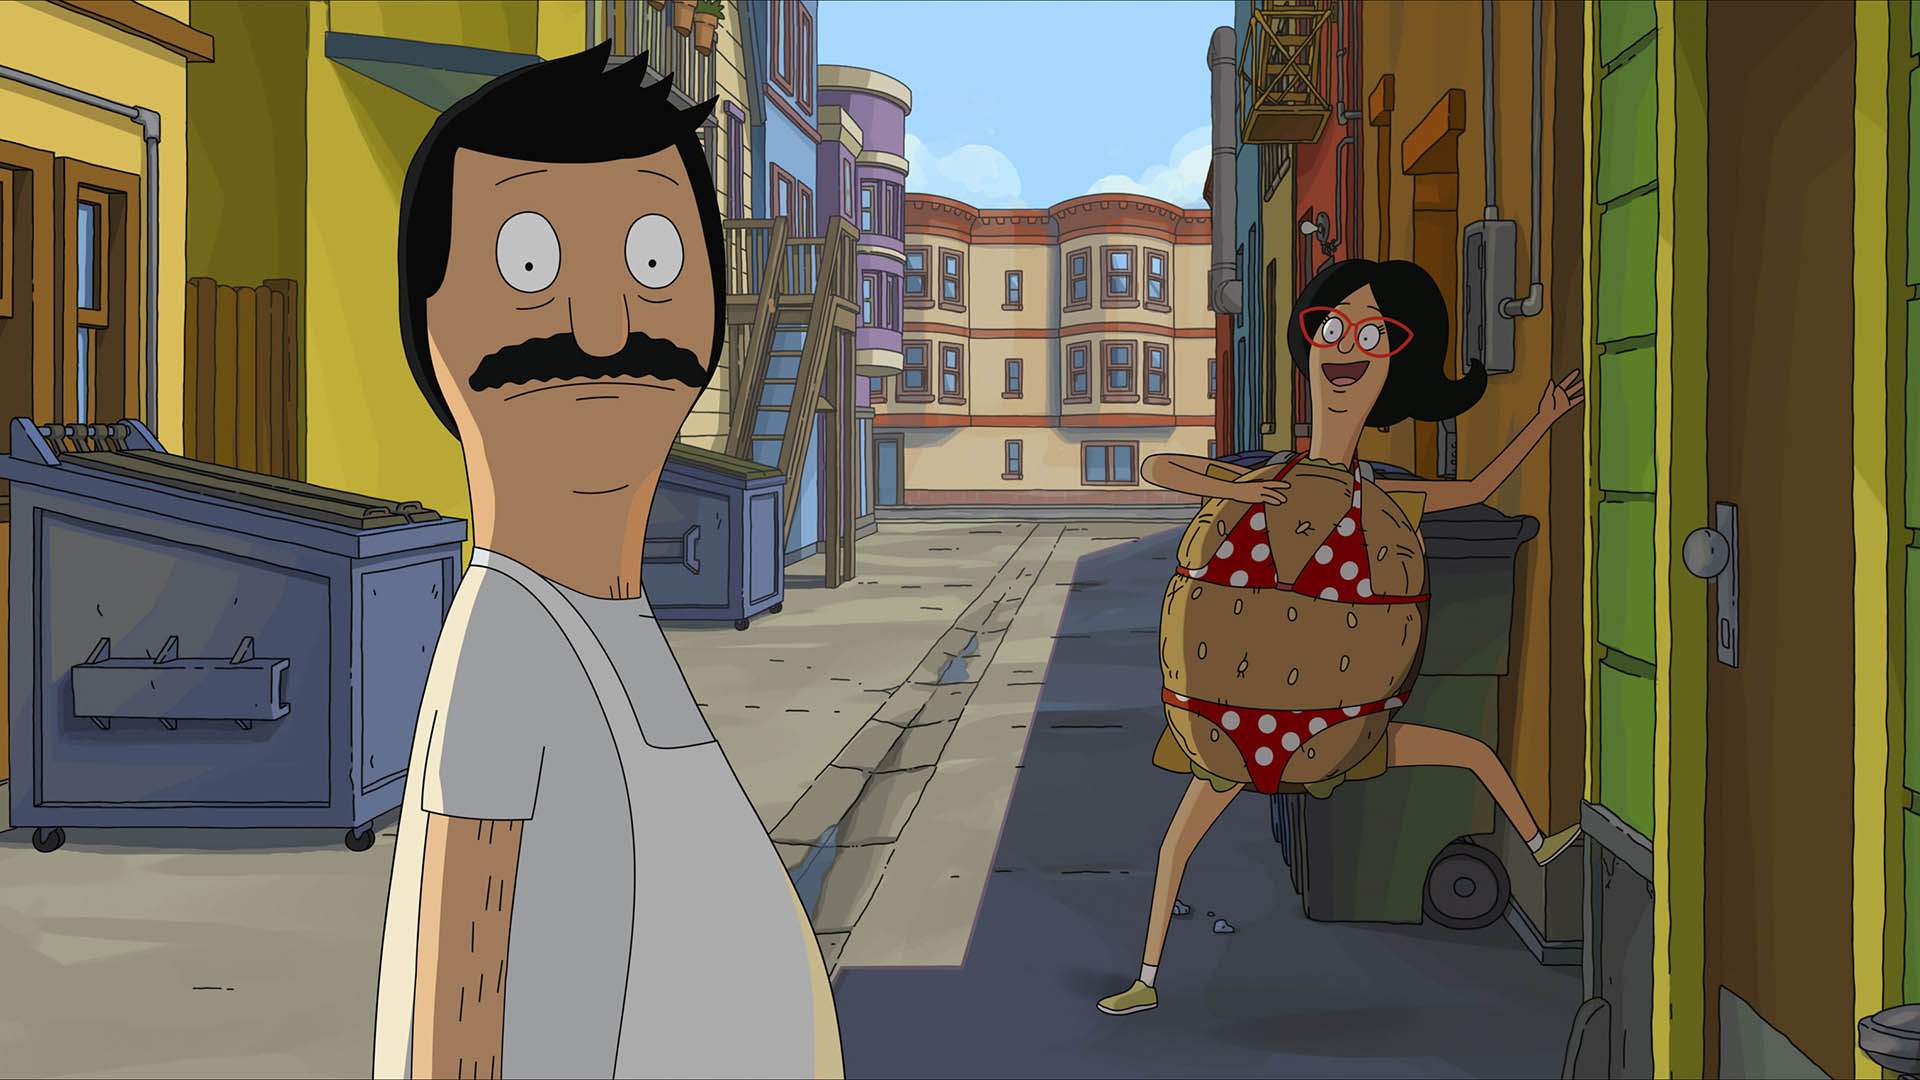 The Long-Awaited 'Bob's Burgers Movie' Finally Has a Trailer So It's Time to Feast Your Eyes